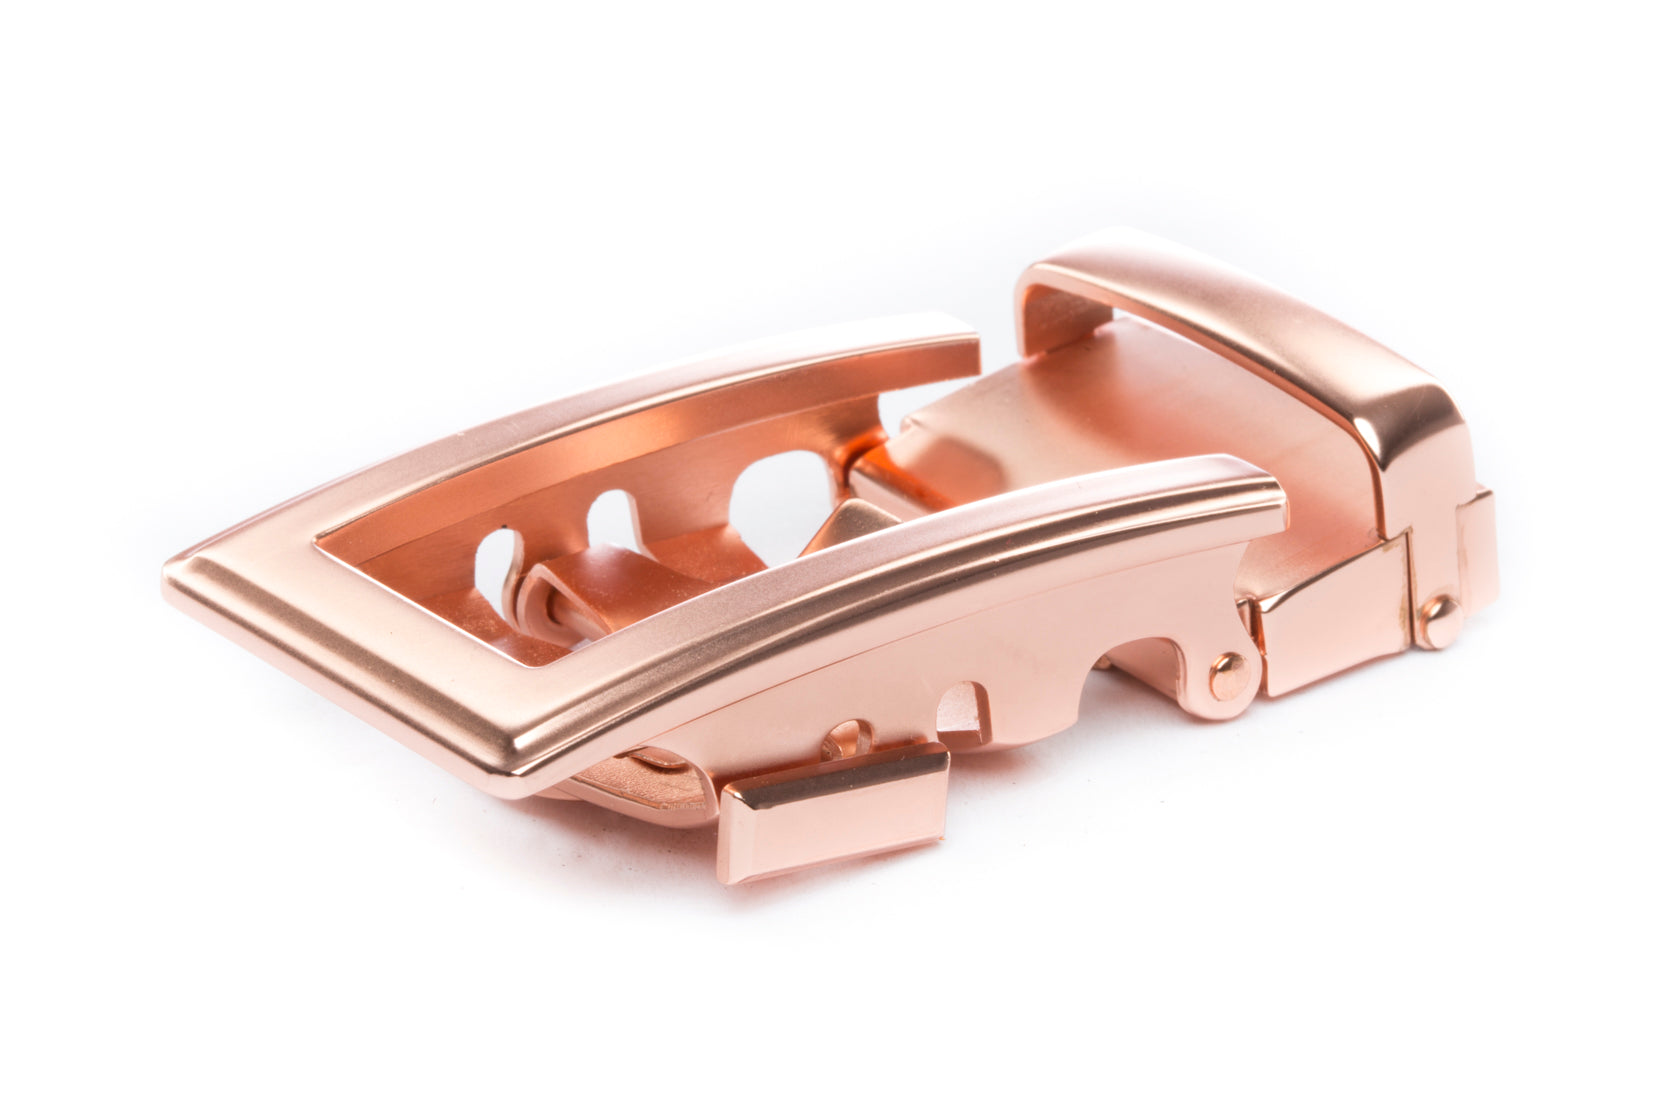 Men's traditional ratchet belt buckle in rose gold with a width of 1.5 inches.